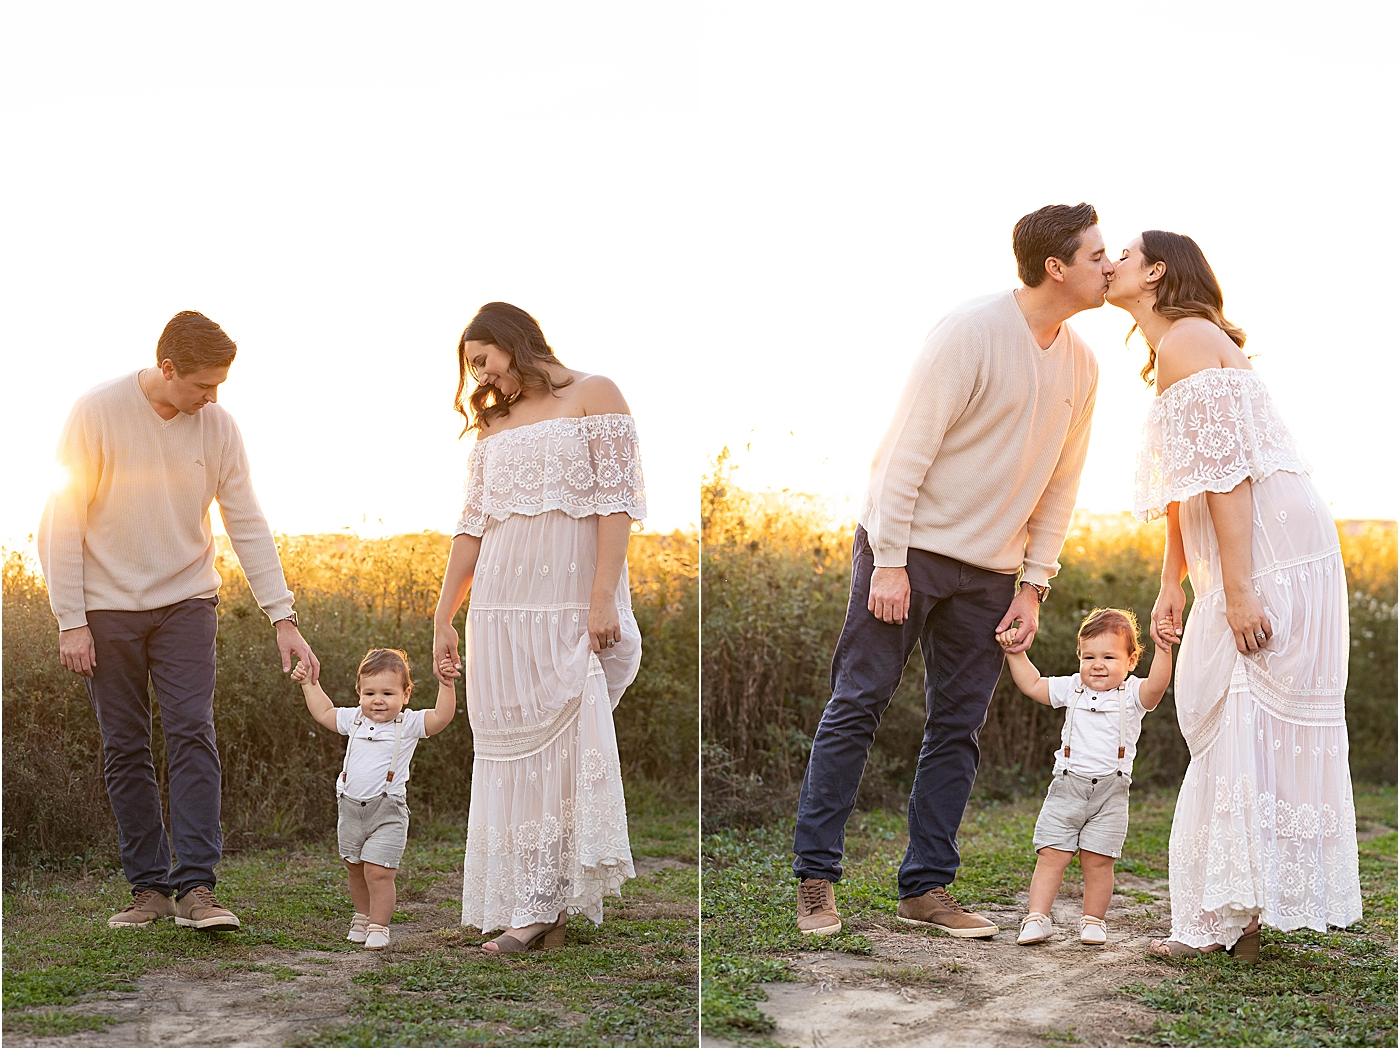 Sunset family session in Geist with Lindsay Konopa Photography.